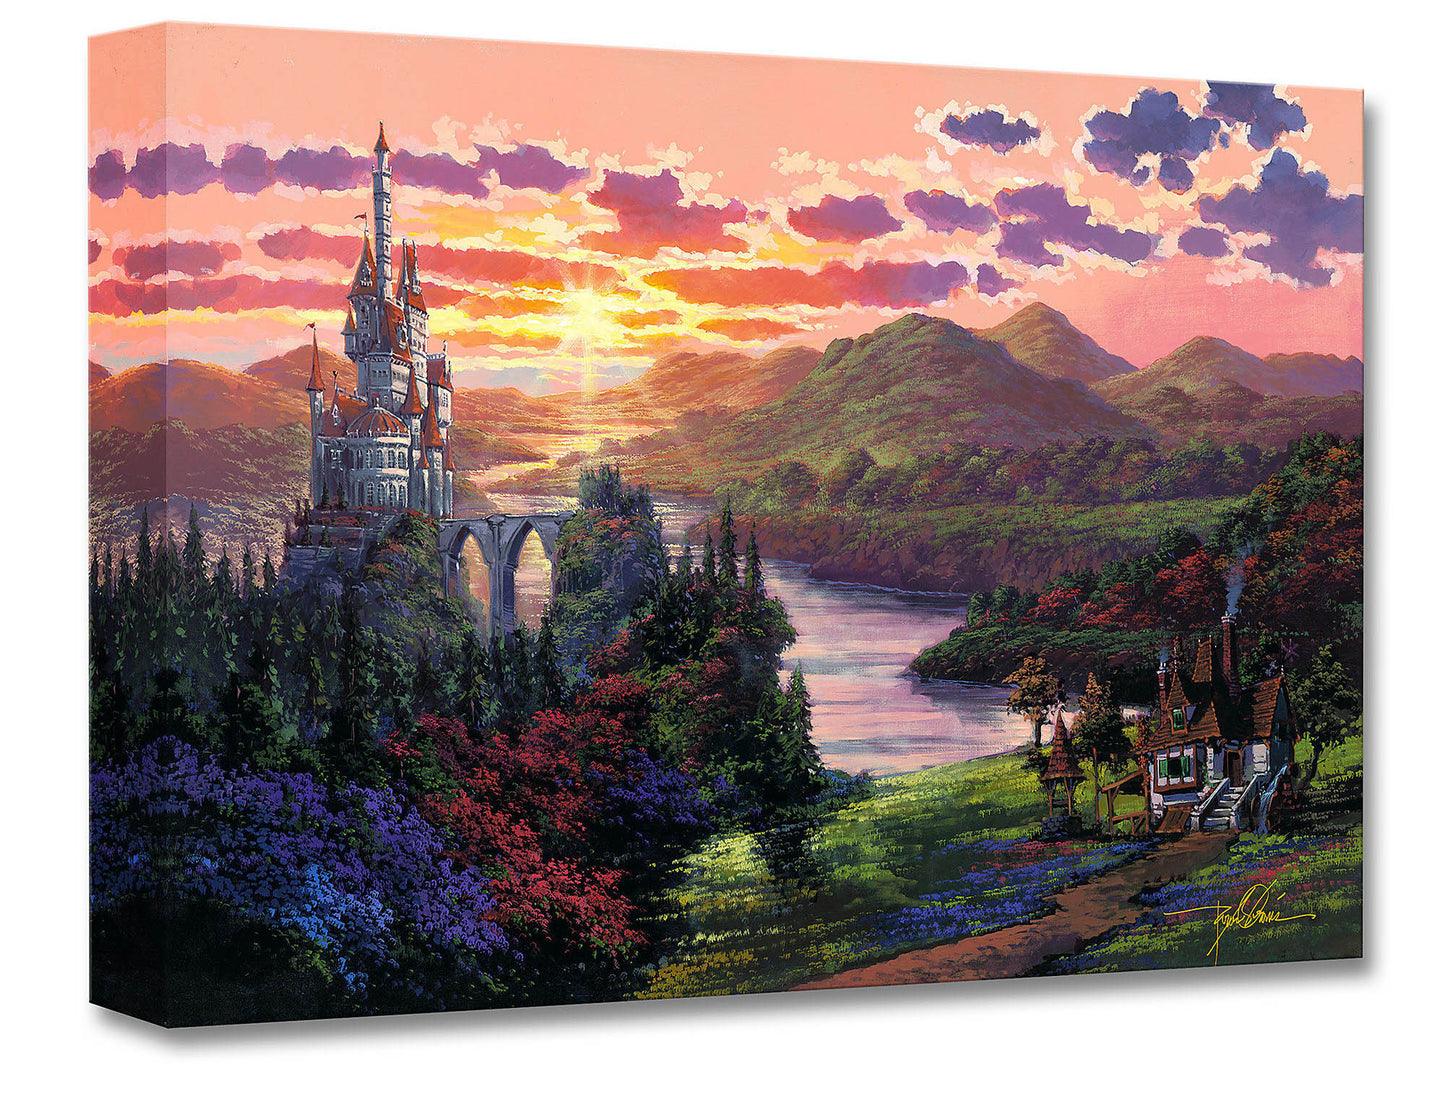 Rodel Gonzalez Disney "The Beauty in Beast's Kingdom" Limited Edition Canvas Giclee